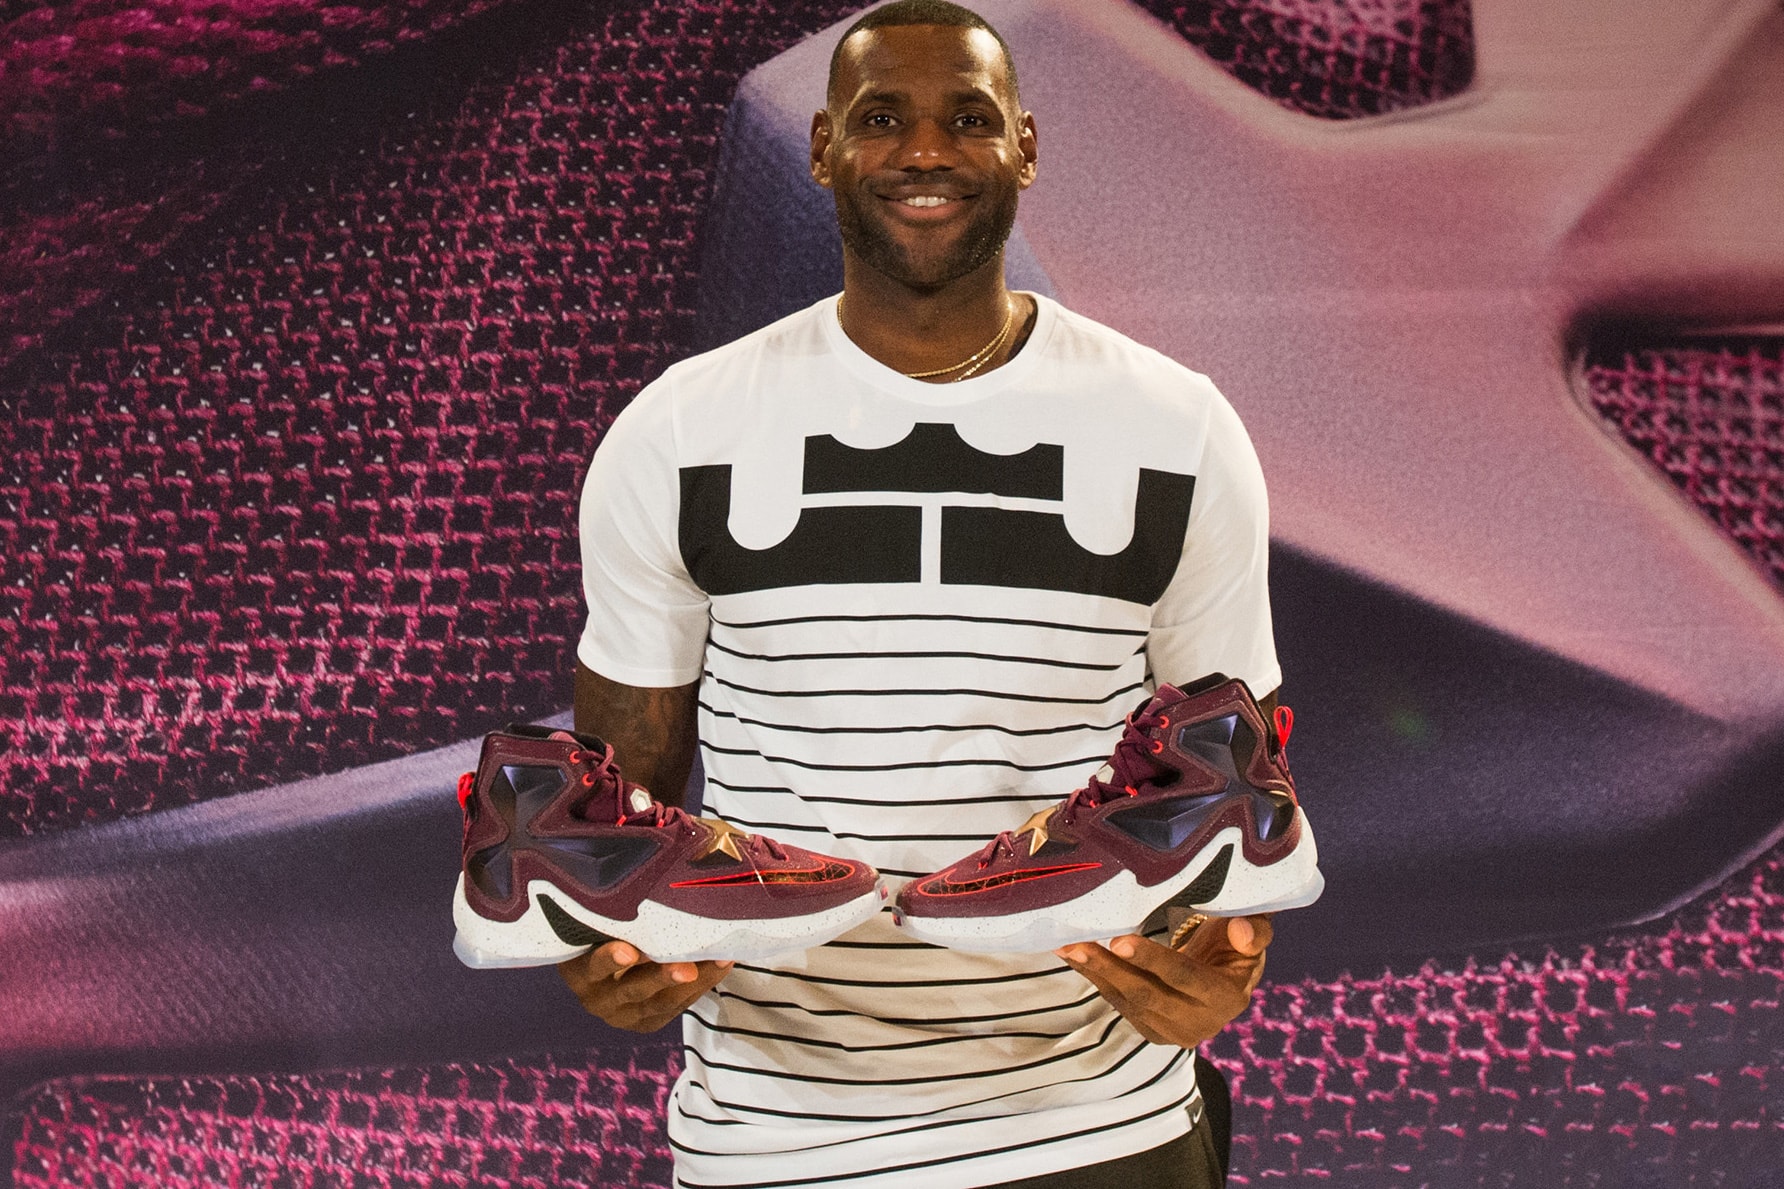 Nike, Unknwn to unveil LeBron James limited edition shoe at